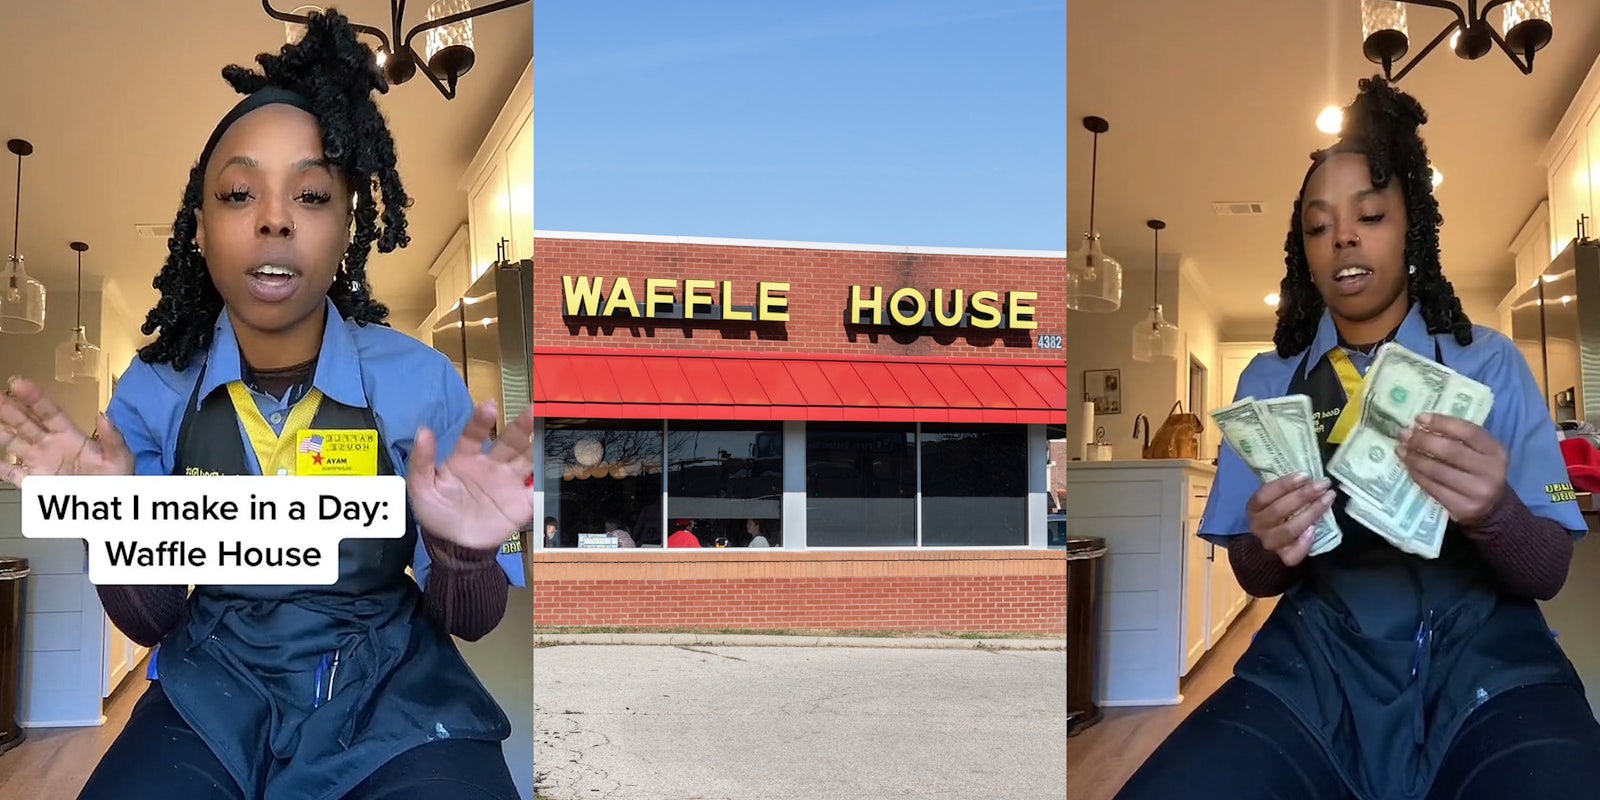 Waffle House worker speaking caption 'What I make in a Day: Waffle House' (l) Waffle House building with sign (c) Waffle House worker speaking counting cash (r)